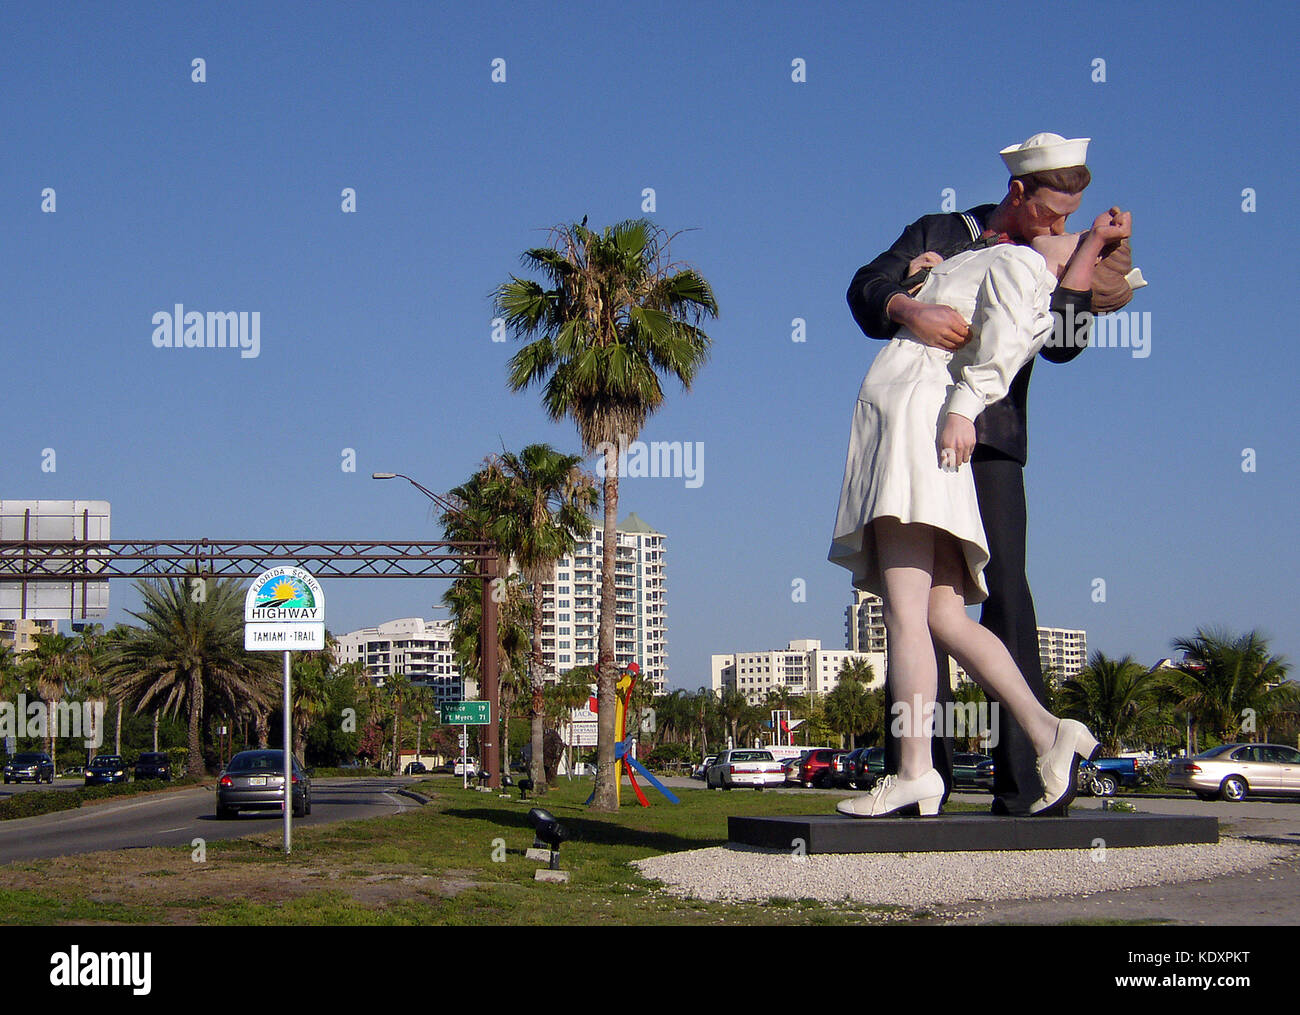 Unconditional Surrender” is a painted aluiminum sculpture by J. Seward  Johnson that is modeled after a famous photograph of a U.S. Navy sailor  kissing a nurse in New York City's Times Square